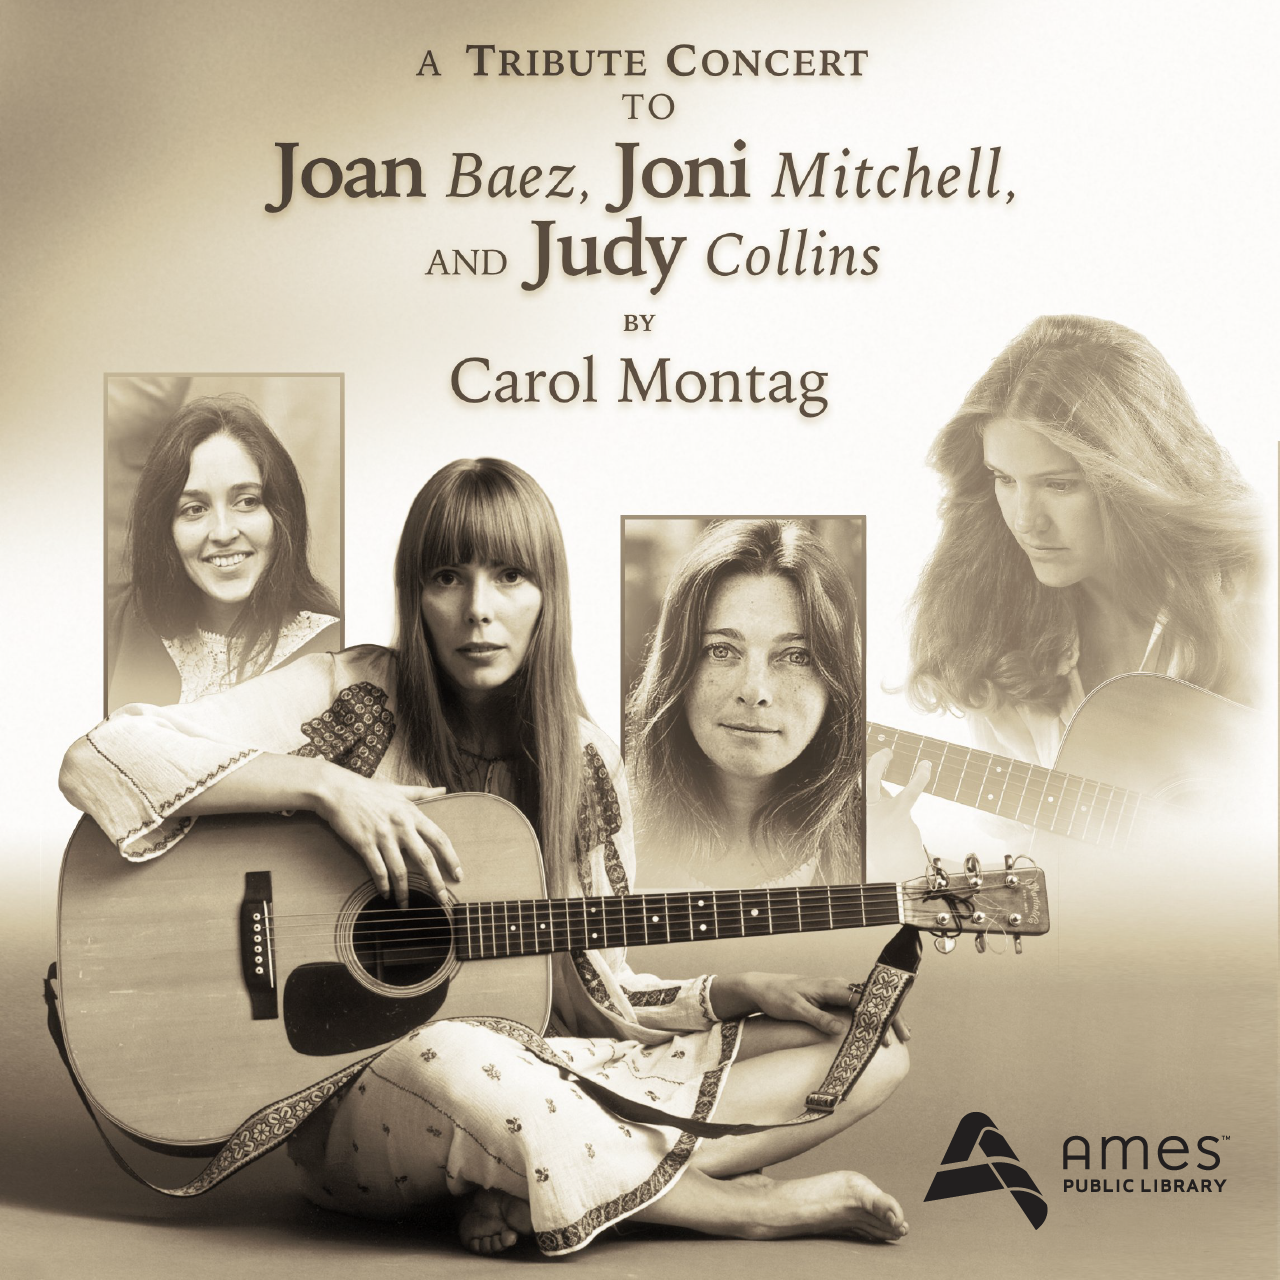 A Tribute Concert to Joan Baez, Joni Mitchell, and Judy Collins by Carol Montag